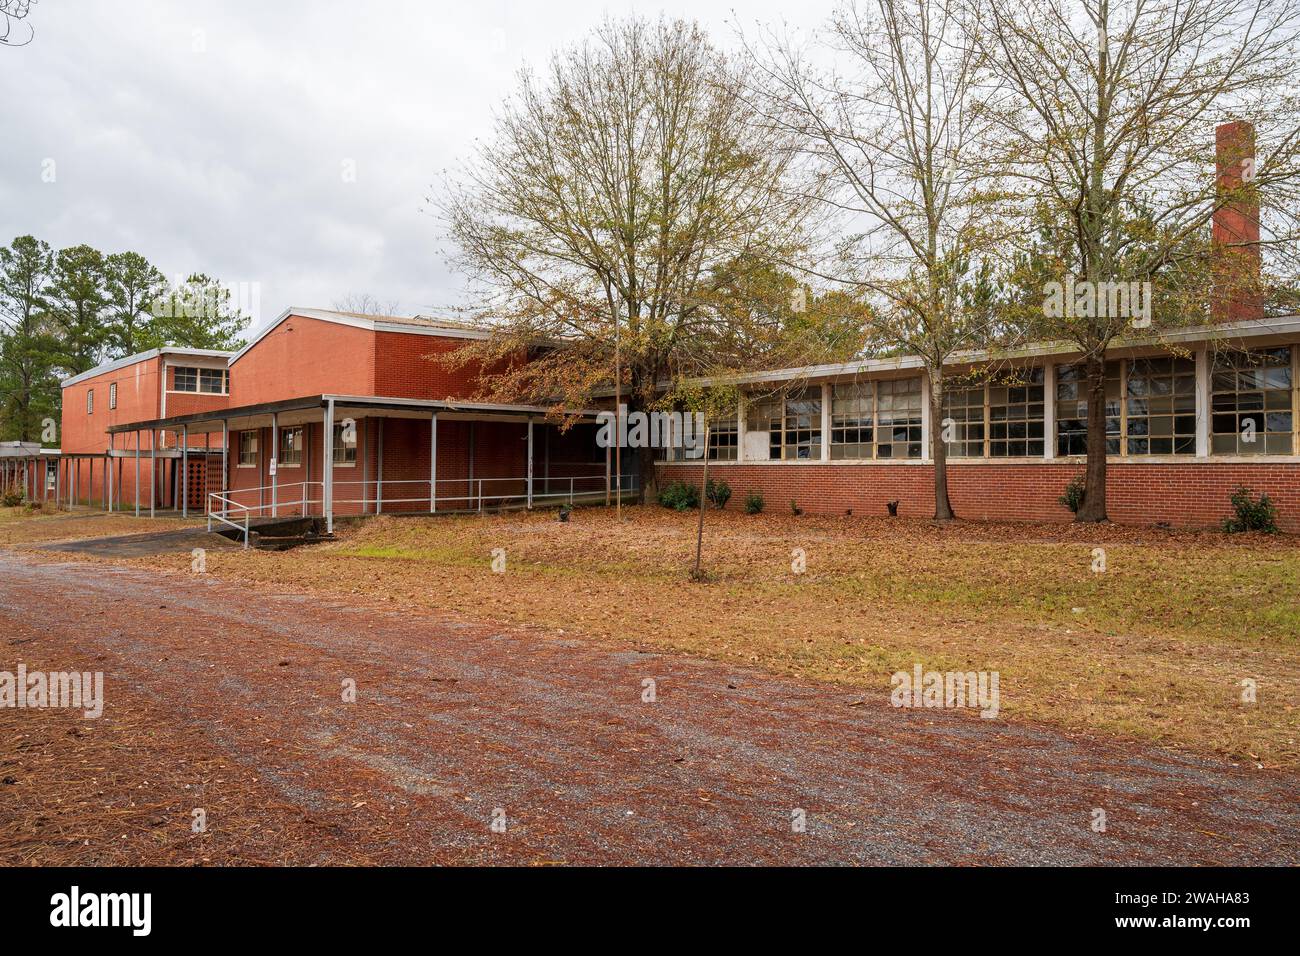 Closed and abandoned elementary school building that is dilapidated and rundown in rural Alabama USA. Stock Photo